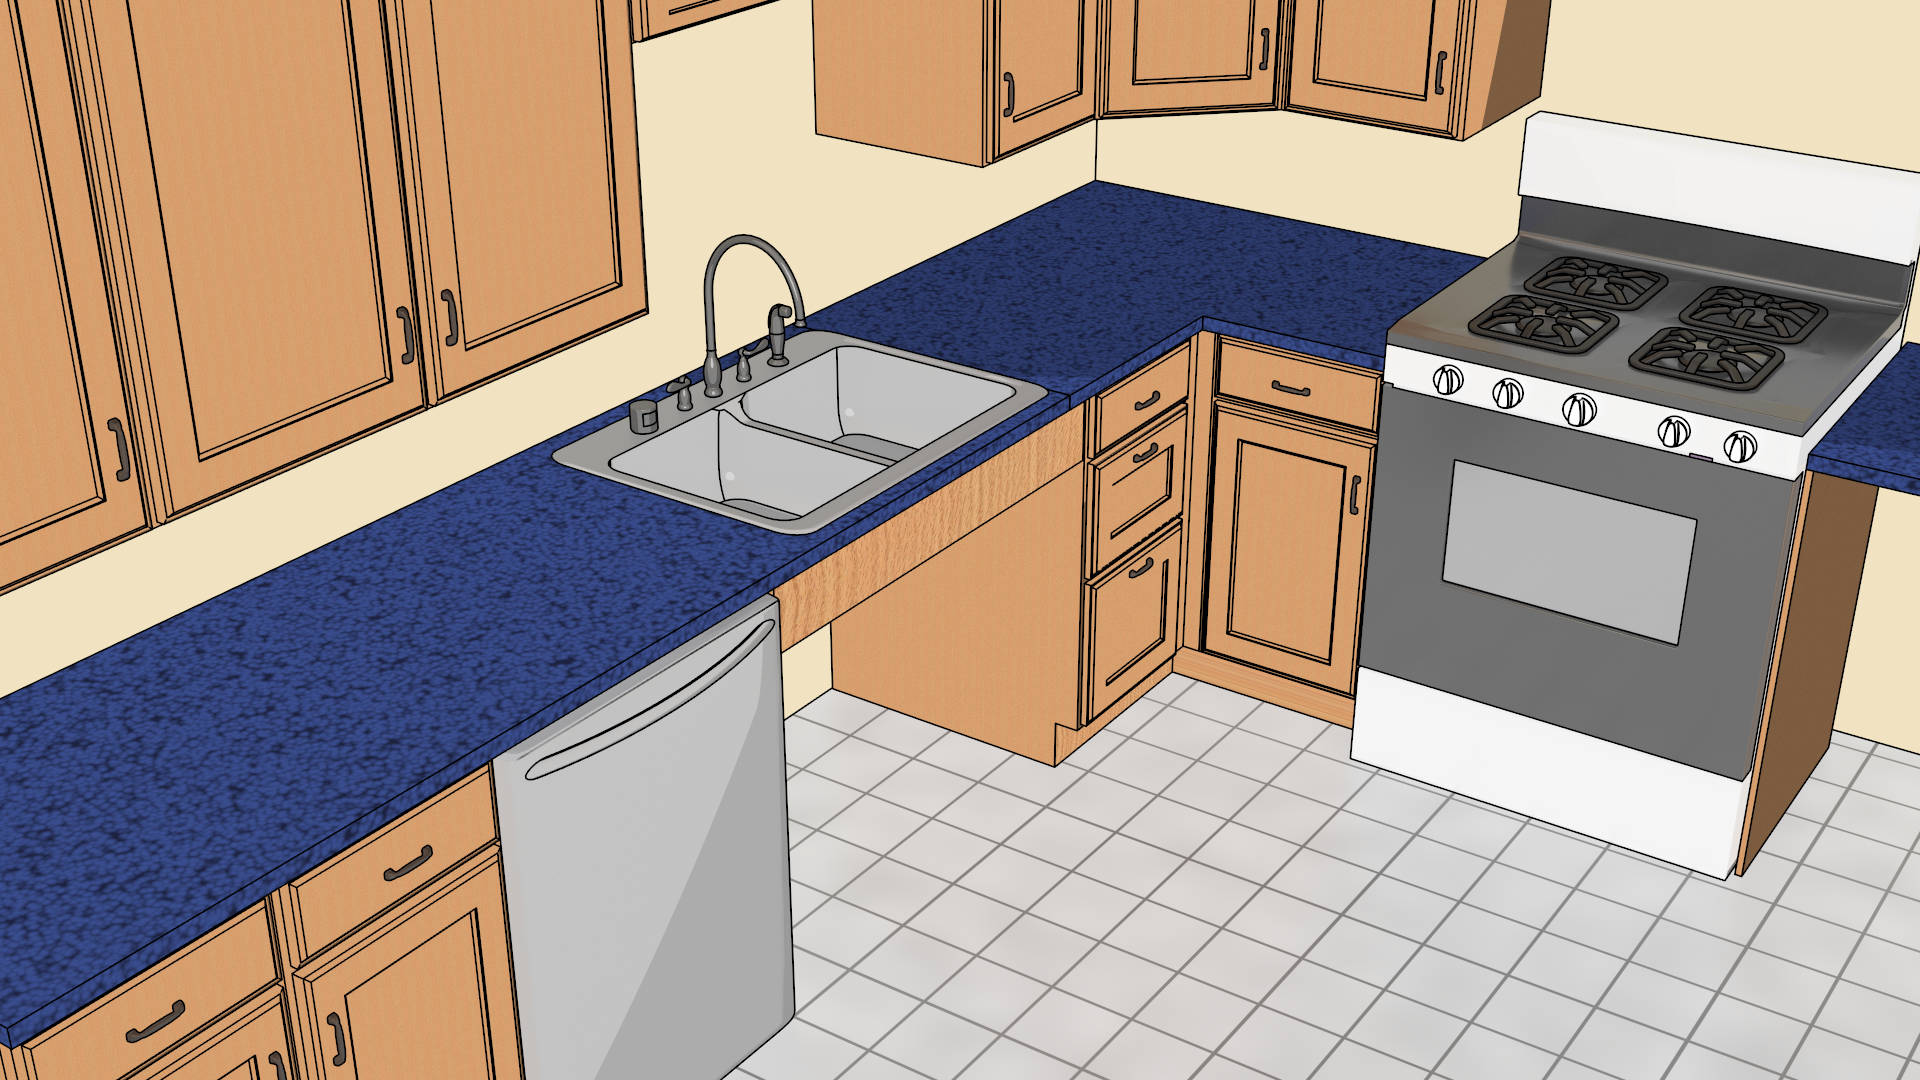 A residential dwelling unit kitchen with base cabinetry and conventional range.  Open space beneath kitchen sink provides clearance for a forward approach.